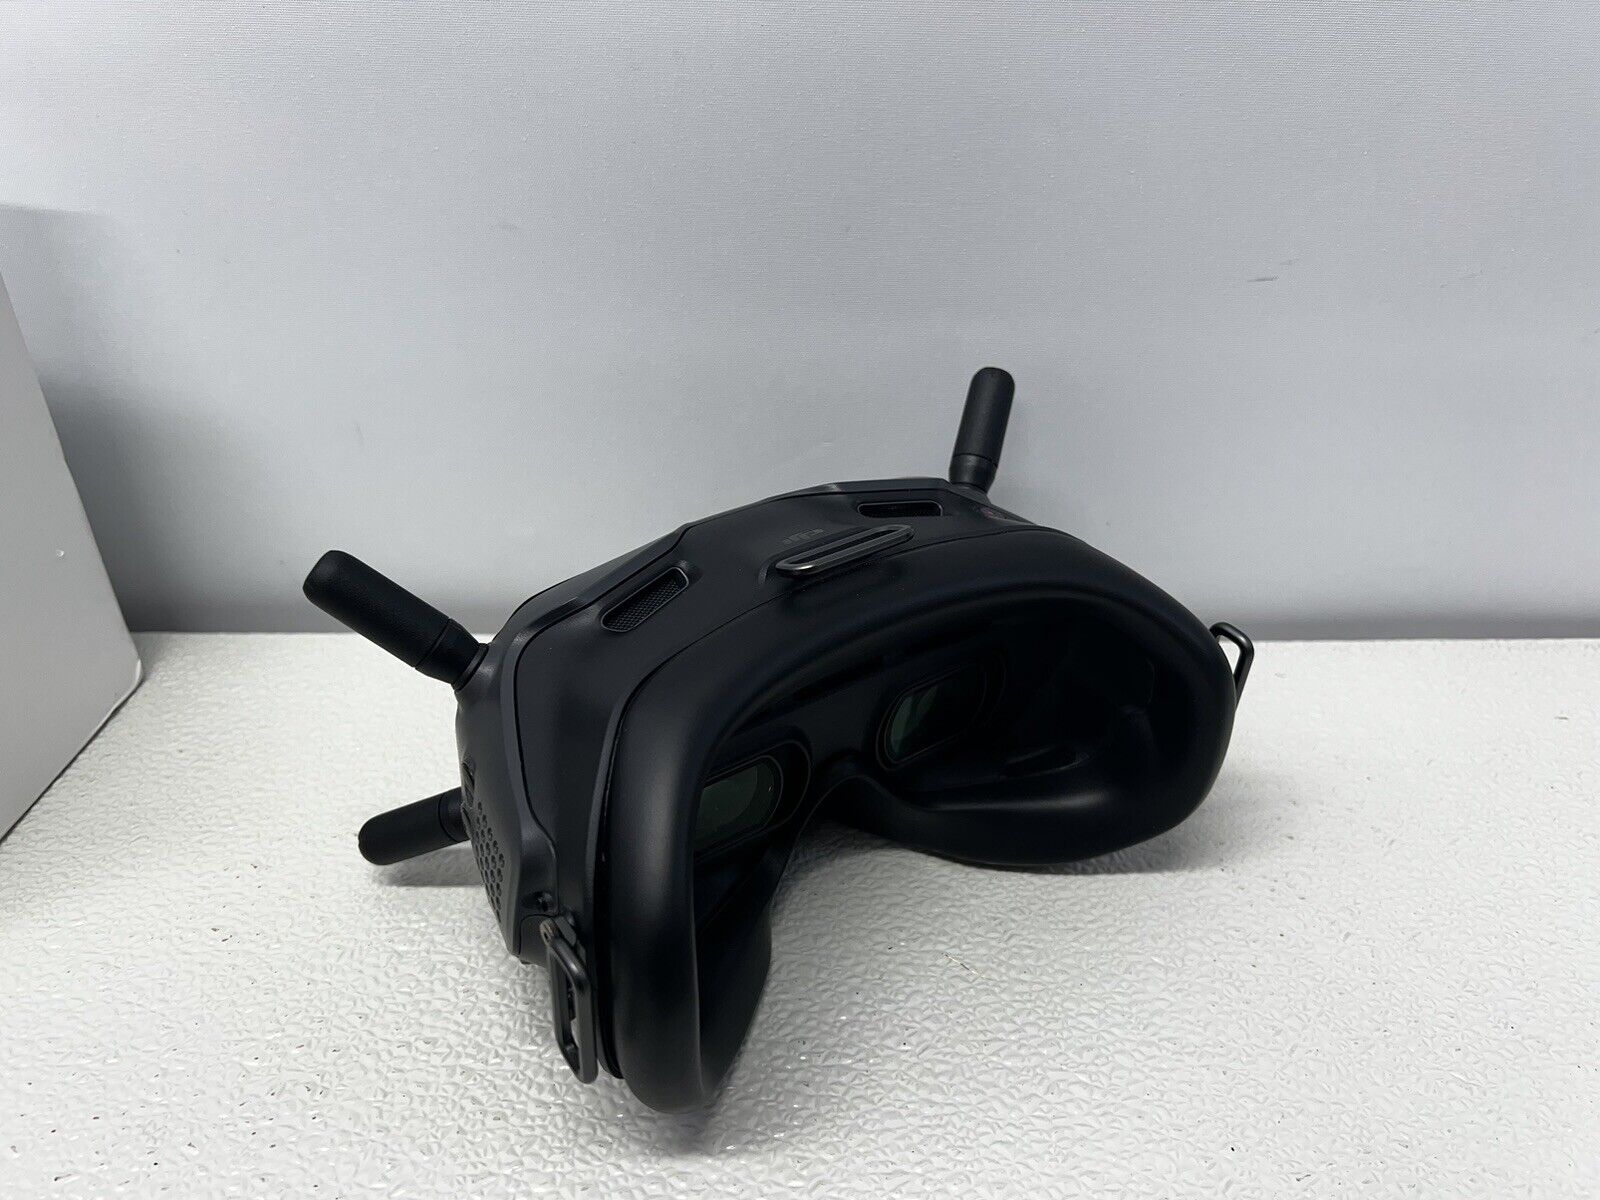 DJI FPV Goggles V2 for Racing Experience